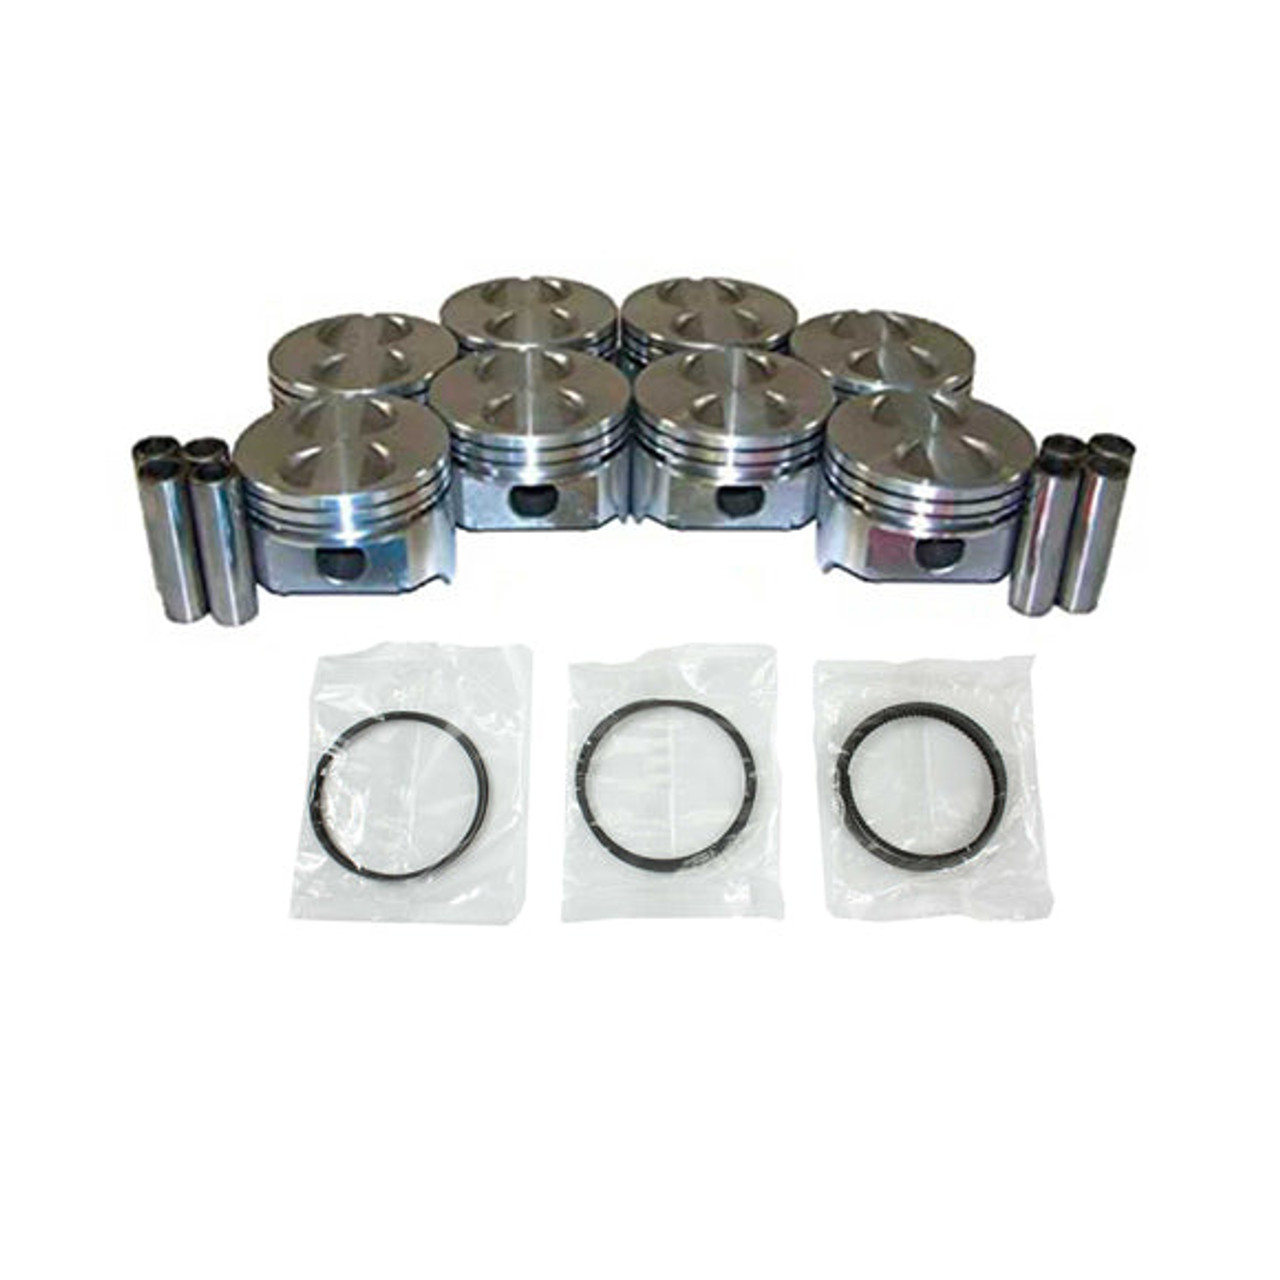 Piston Set with Rings - 1985 Ford Mustang 5.0L Engine Parts # PRK4112ZE25